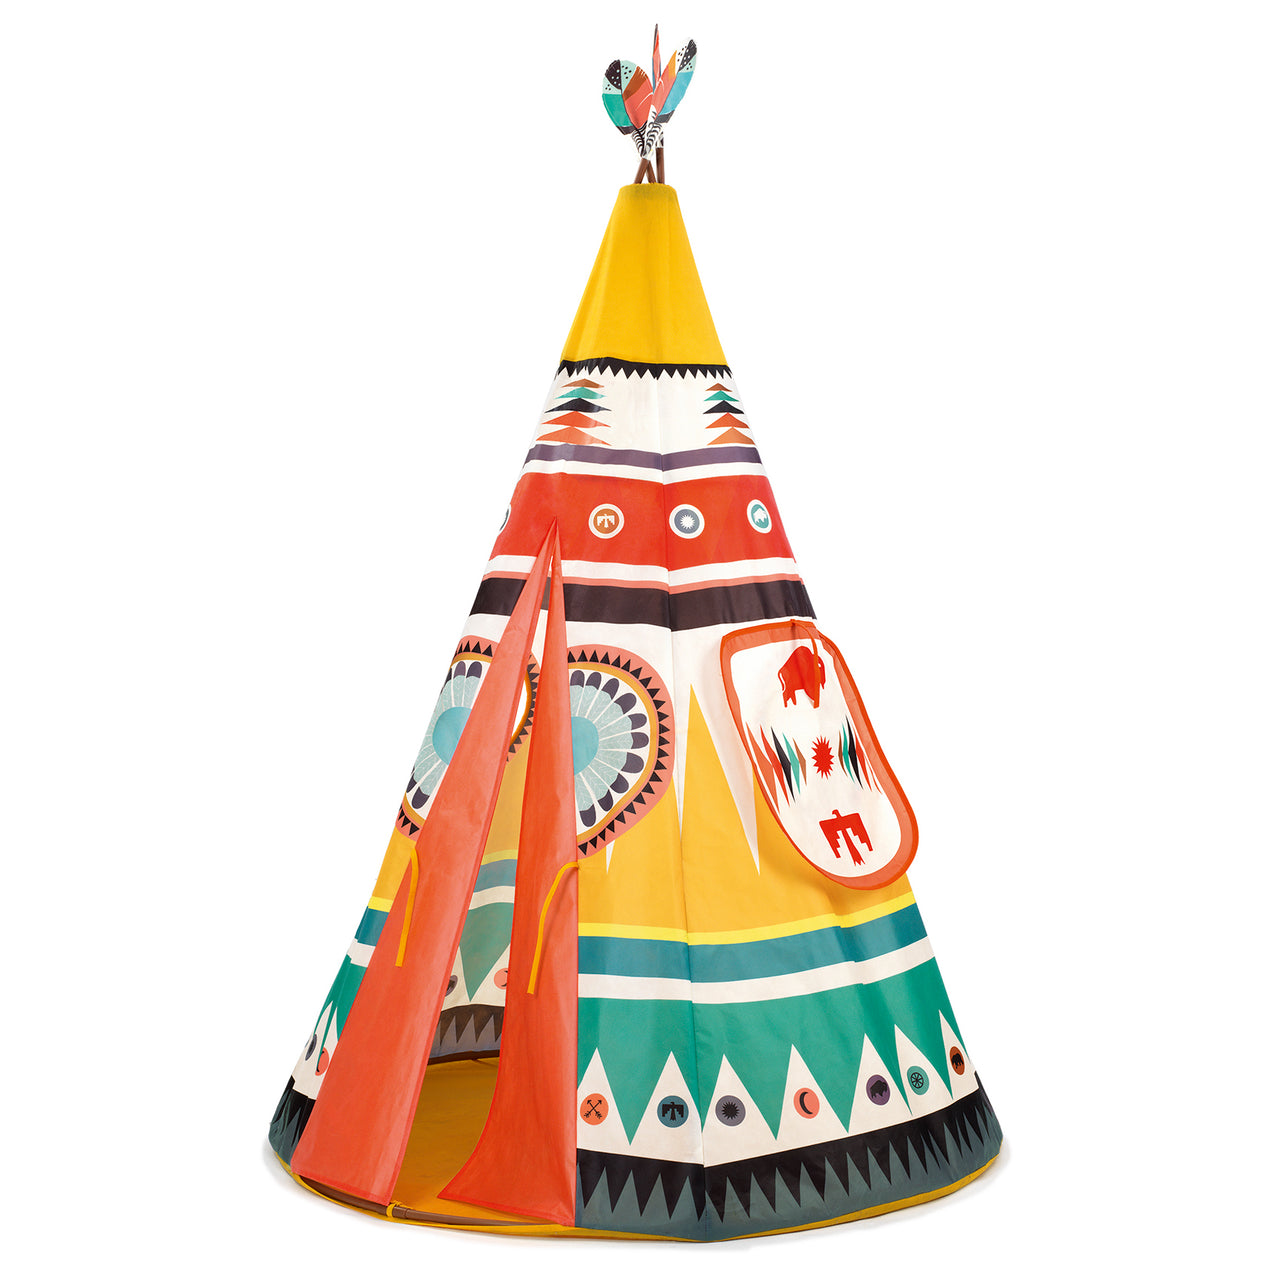 The teepee that every little rascal dreams of.This Colorful teepee with Native American-inspired patterns will add fun and charm to any room.Complete with a floor, there is also a doorway and a window, both of which can be kept open with strings.The teepee fabric is made of polyester in a light quality that can be cleaned with a damp cloth.